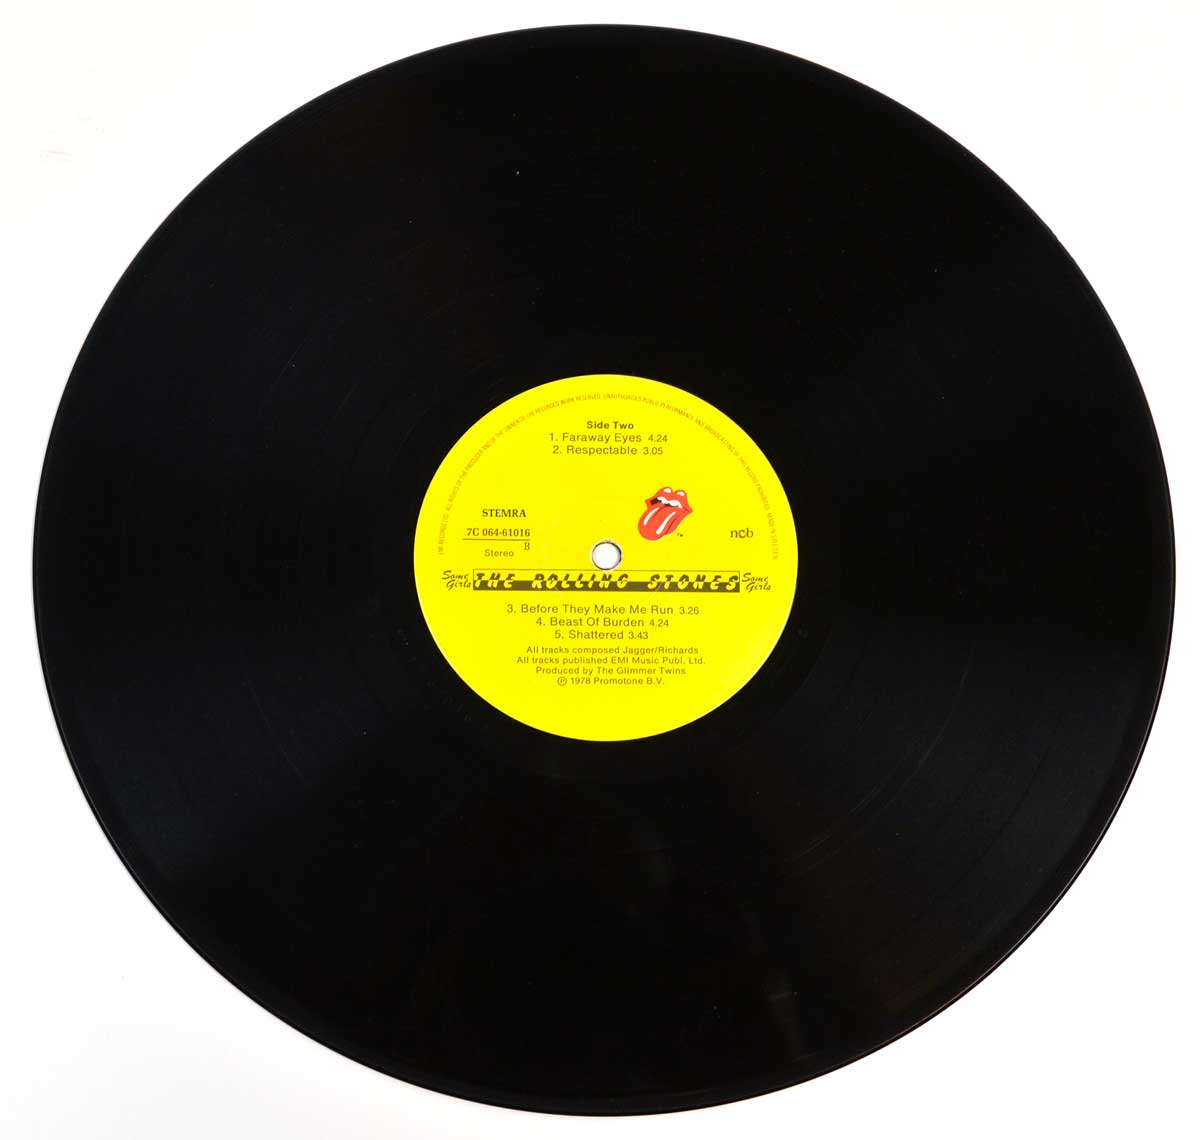 Photo of "ROLLING STONES - Some Girls (Sweden)" 12" LP Record - Side Two: